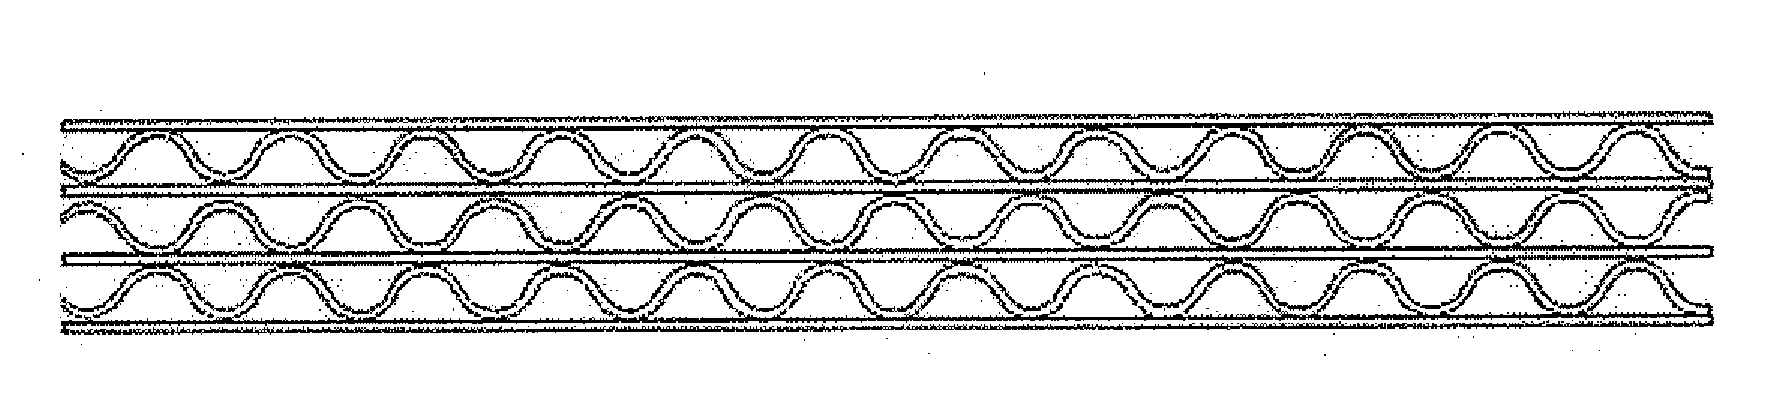 Quadruple-wall corrugated paperboard and method of manufacture